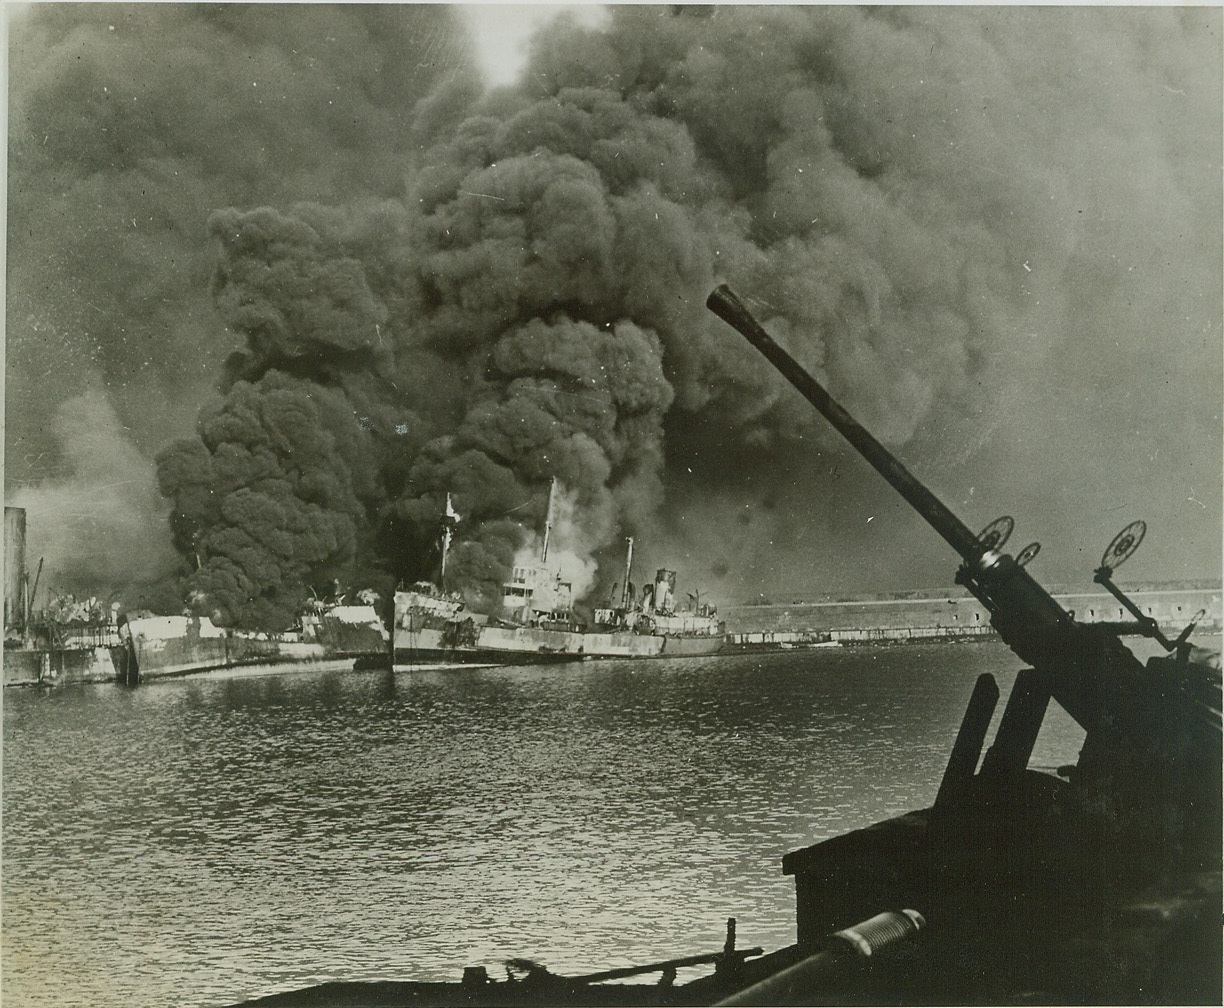 Axis Attack on Bari, 12/16/1943. In the shadow of an anti-aircraft gun, Allied ships burn furiously in the Southern Italian port of Bari, following a German air raid on Dec. 2, 1943. Secretary of War Stimson today announced that two ammunitions ships were hit and the resultant explosion caused spreading fires which destroyed or damaged a number of Allied cargo ships and small harbor craft. There were an estimated 1,000 casualties, including 37 American naval personnel. Credit Army Signal Corps Photo From (ACME);